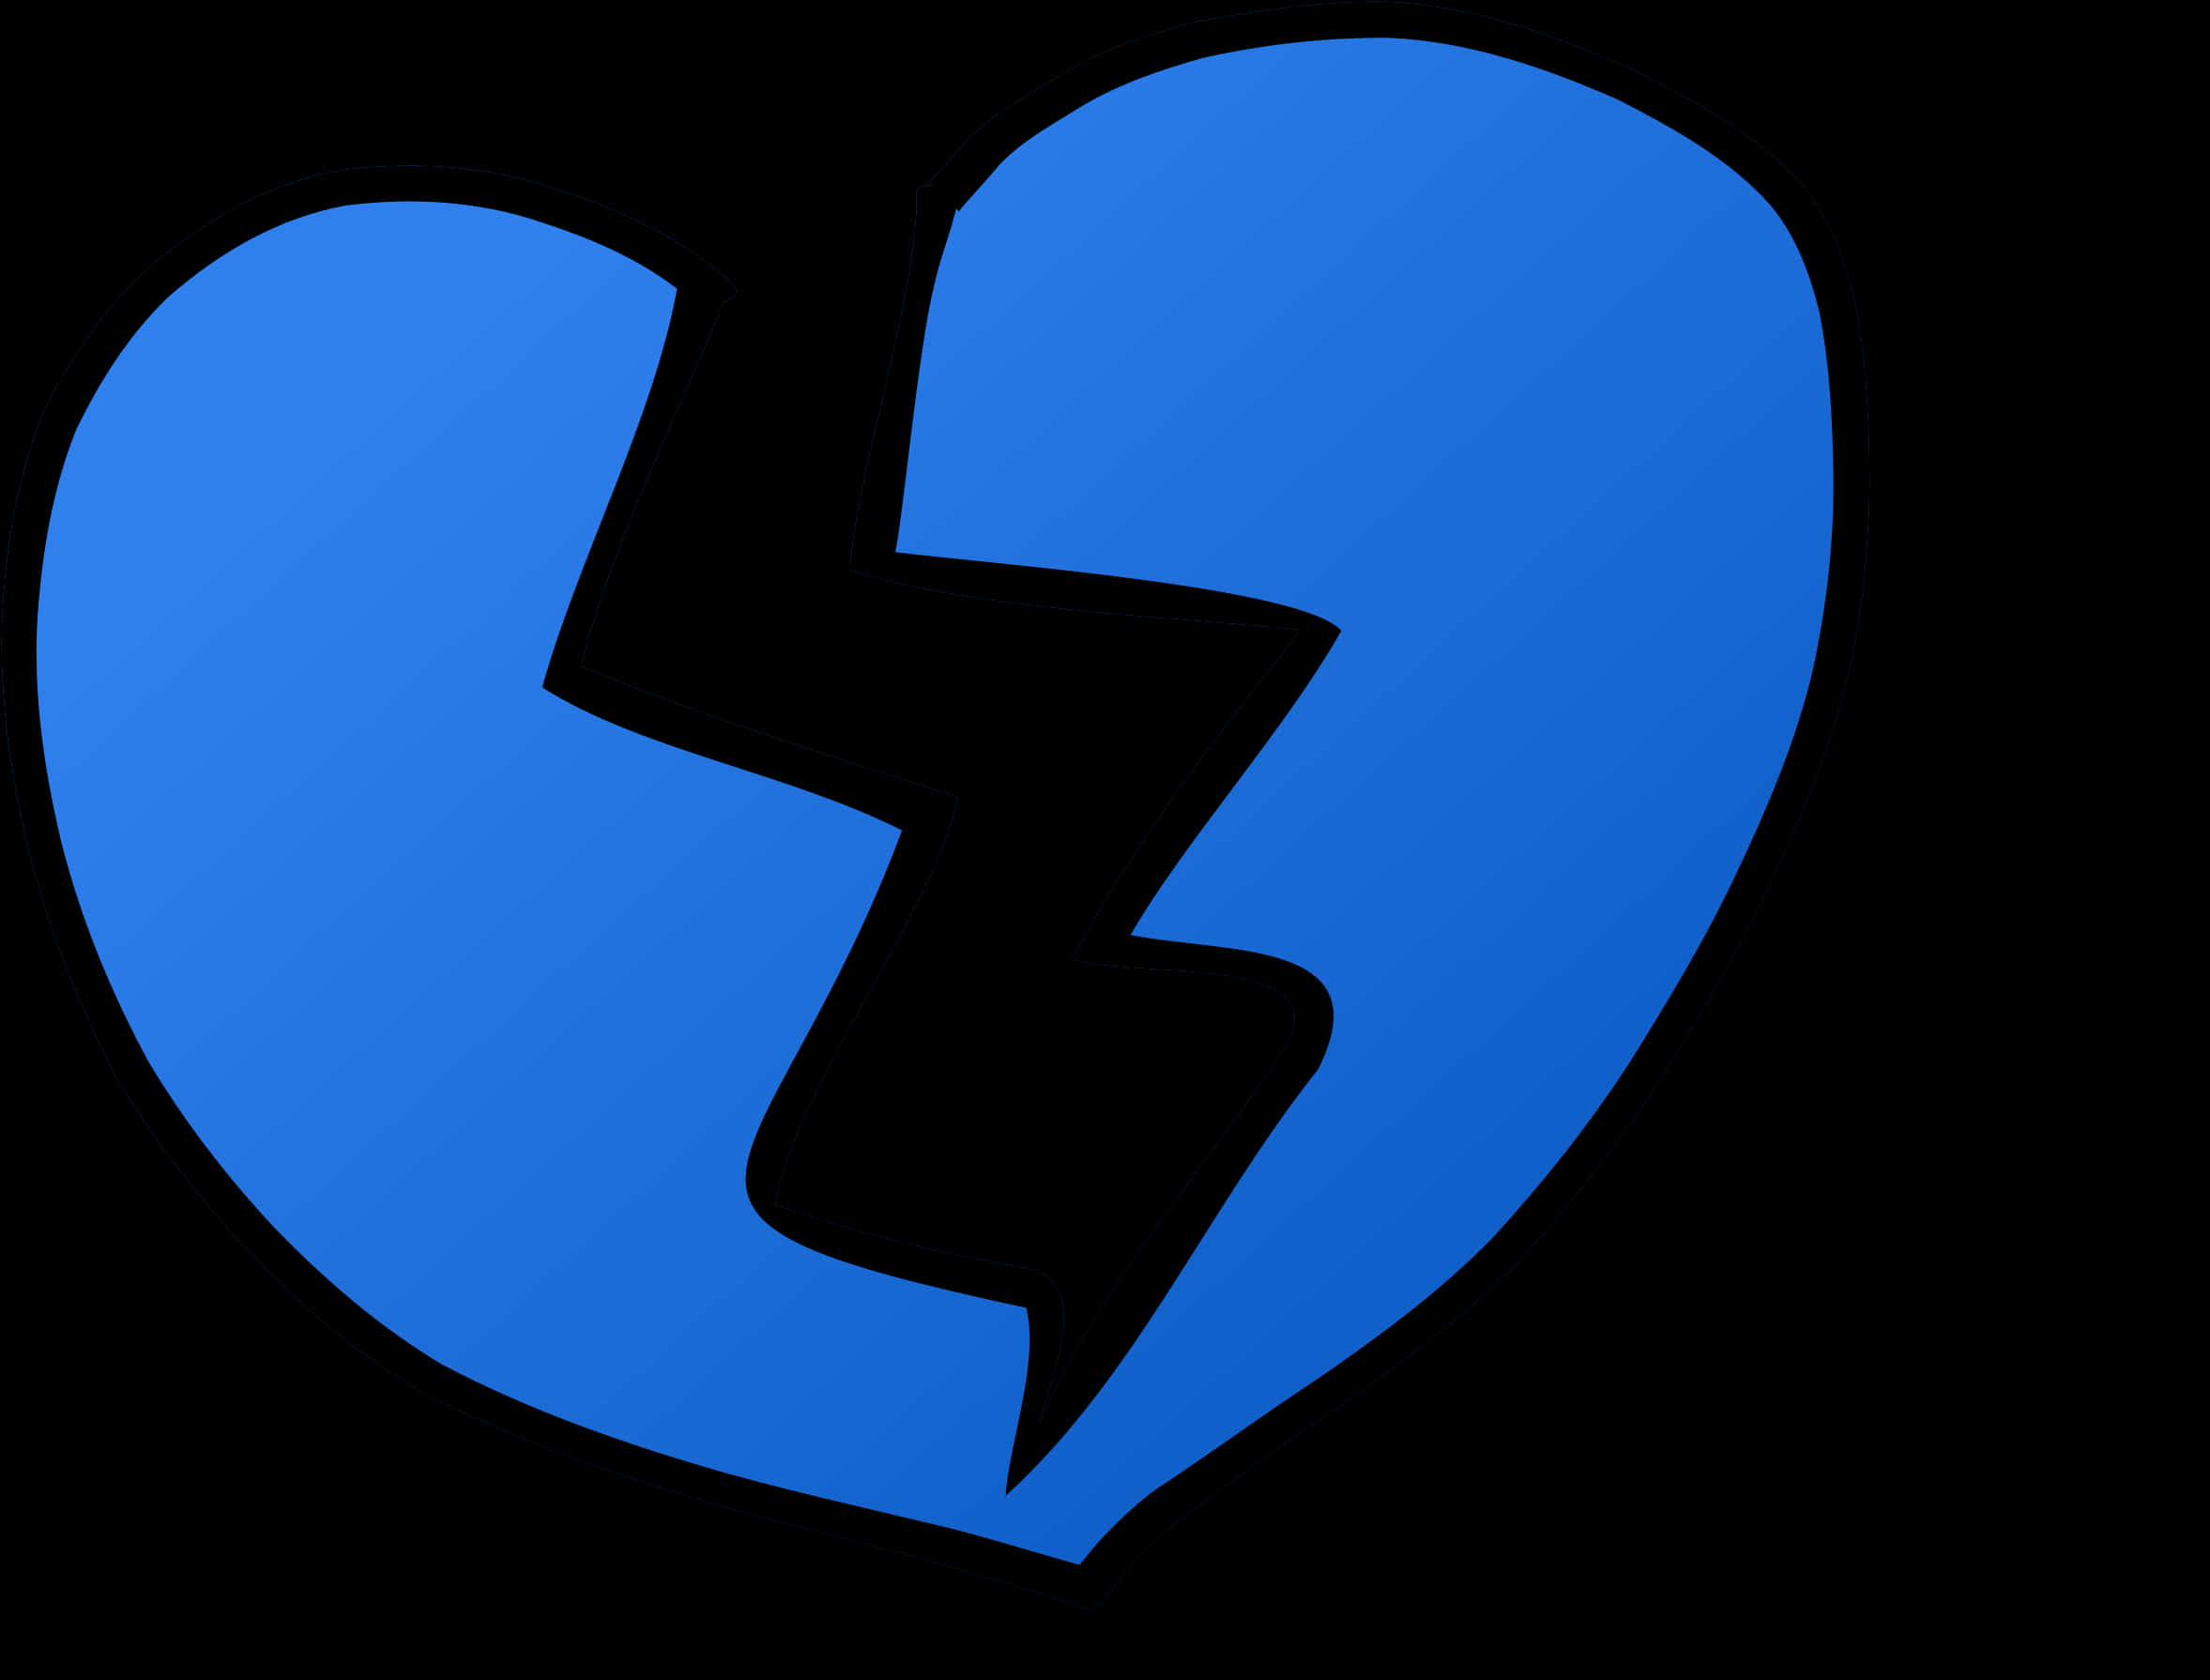 A Blue Broken Heart With Black Background PNG